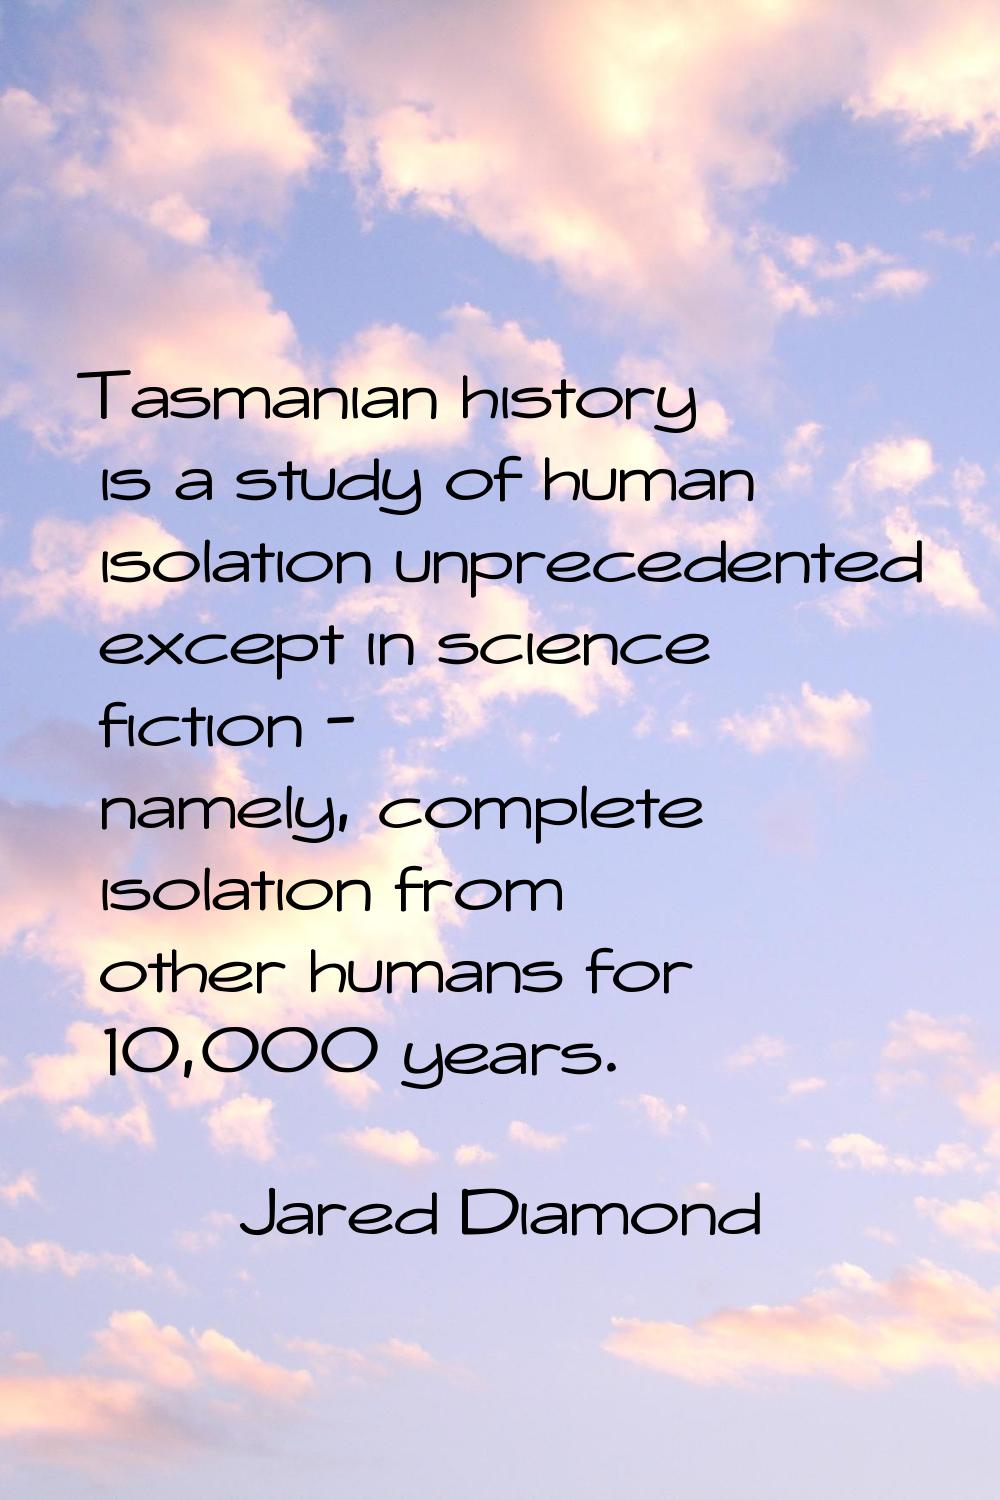 Tasmanian history is a study of human isolation unprecedented except in science fiction - namely, c